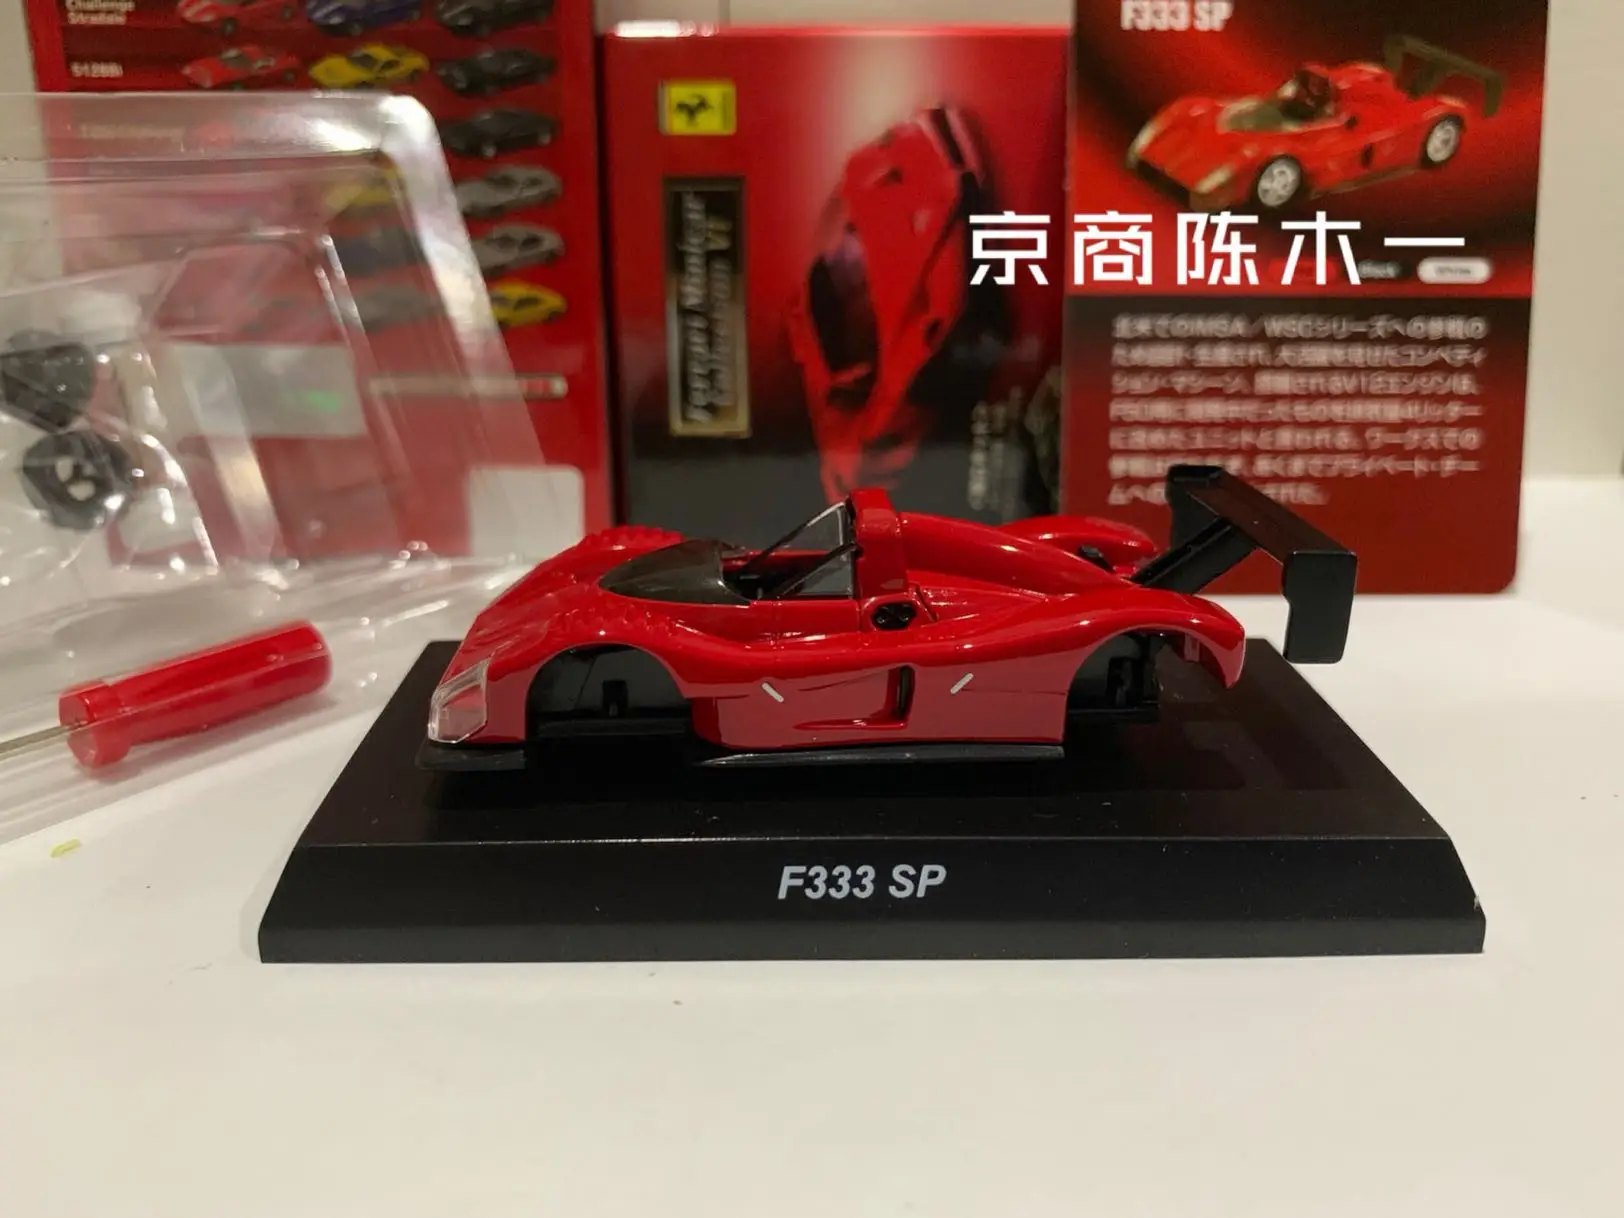 1/64 KYOSHO Ferrari  F333 SP Collection of die-cast alloy assembled car decoration model toys